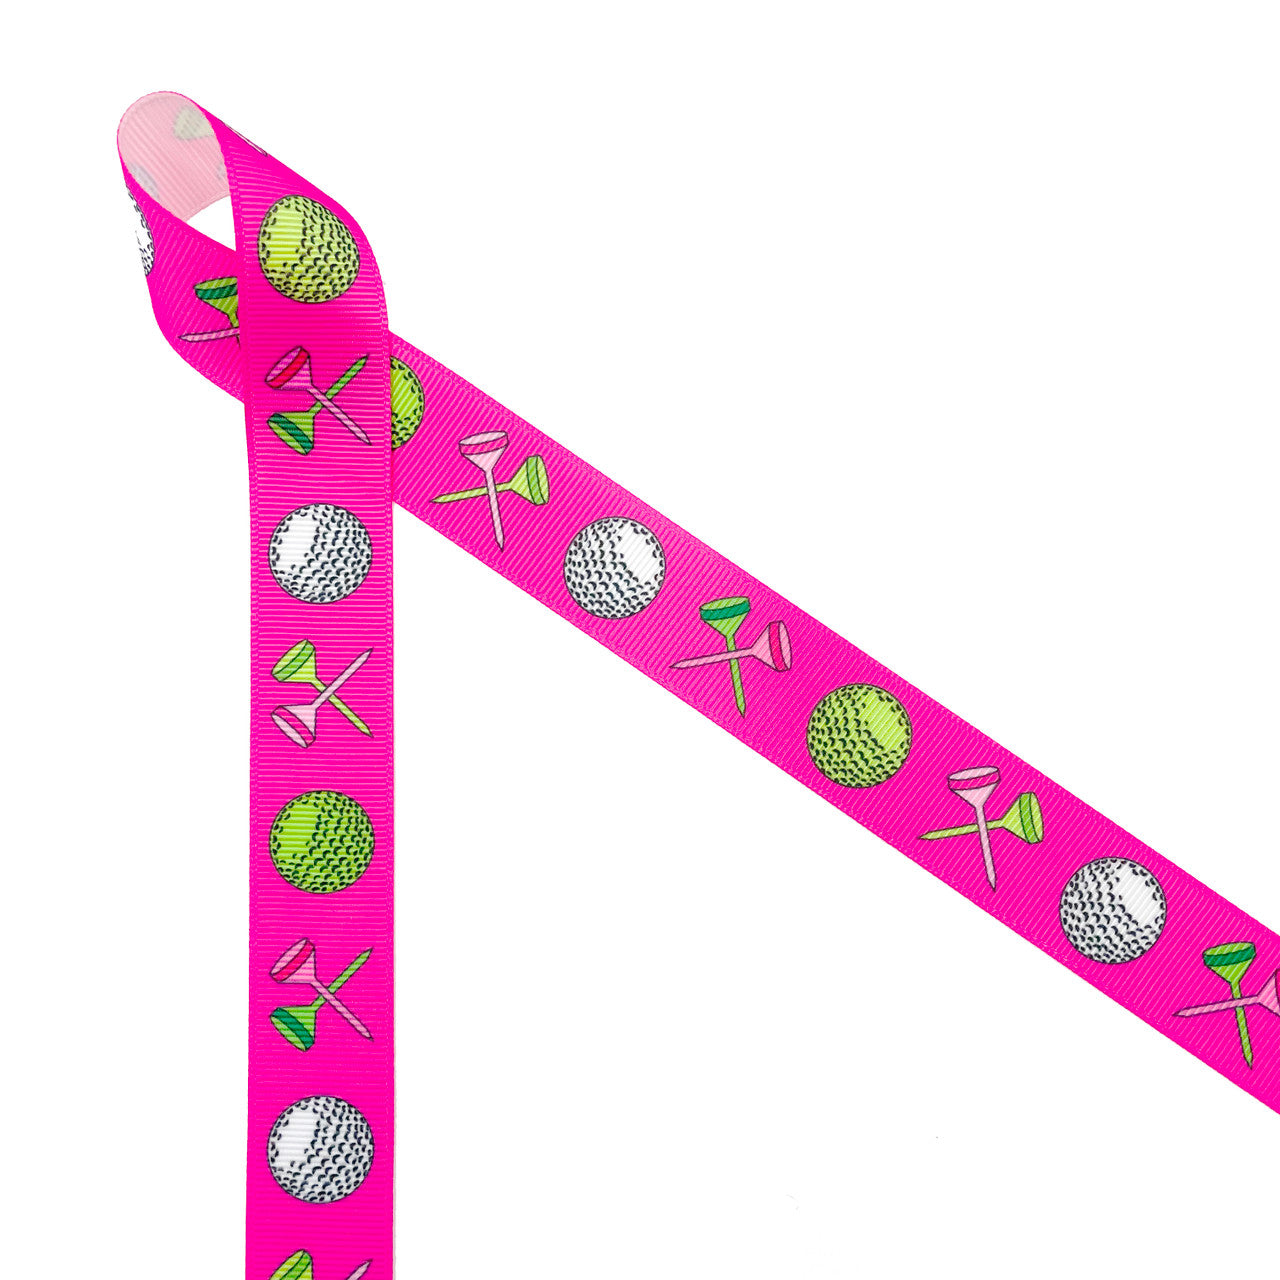 Golf ribbon Women's golf featuring golf balls and crossed tees on a hot pink background printed on 7/8" white grosgrain